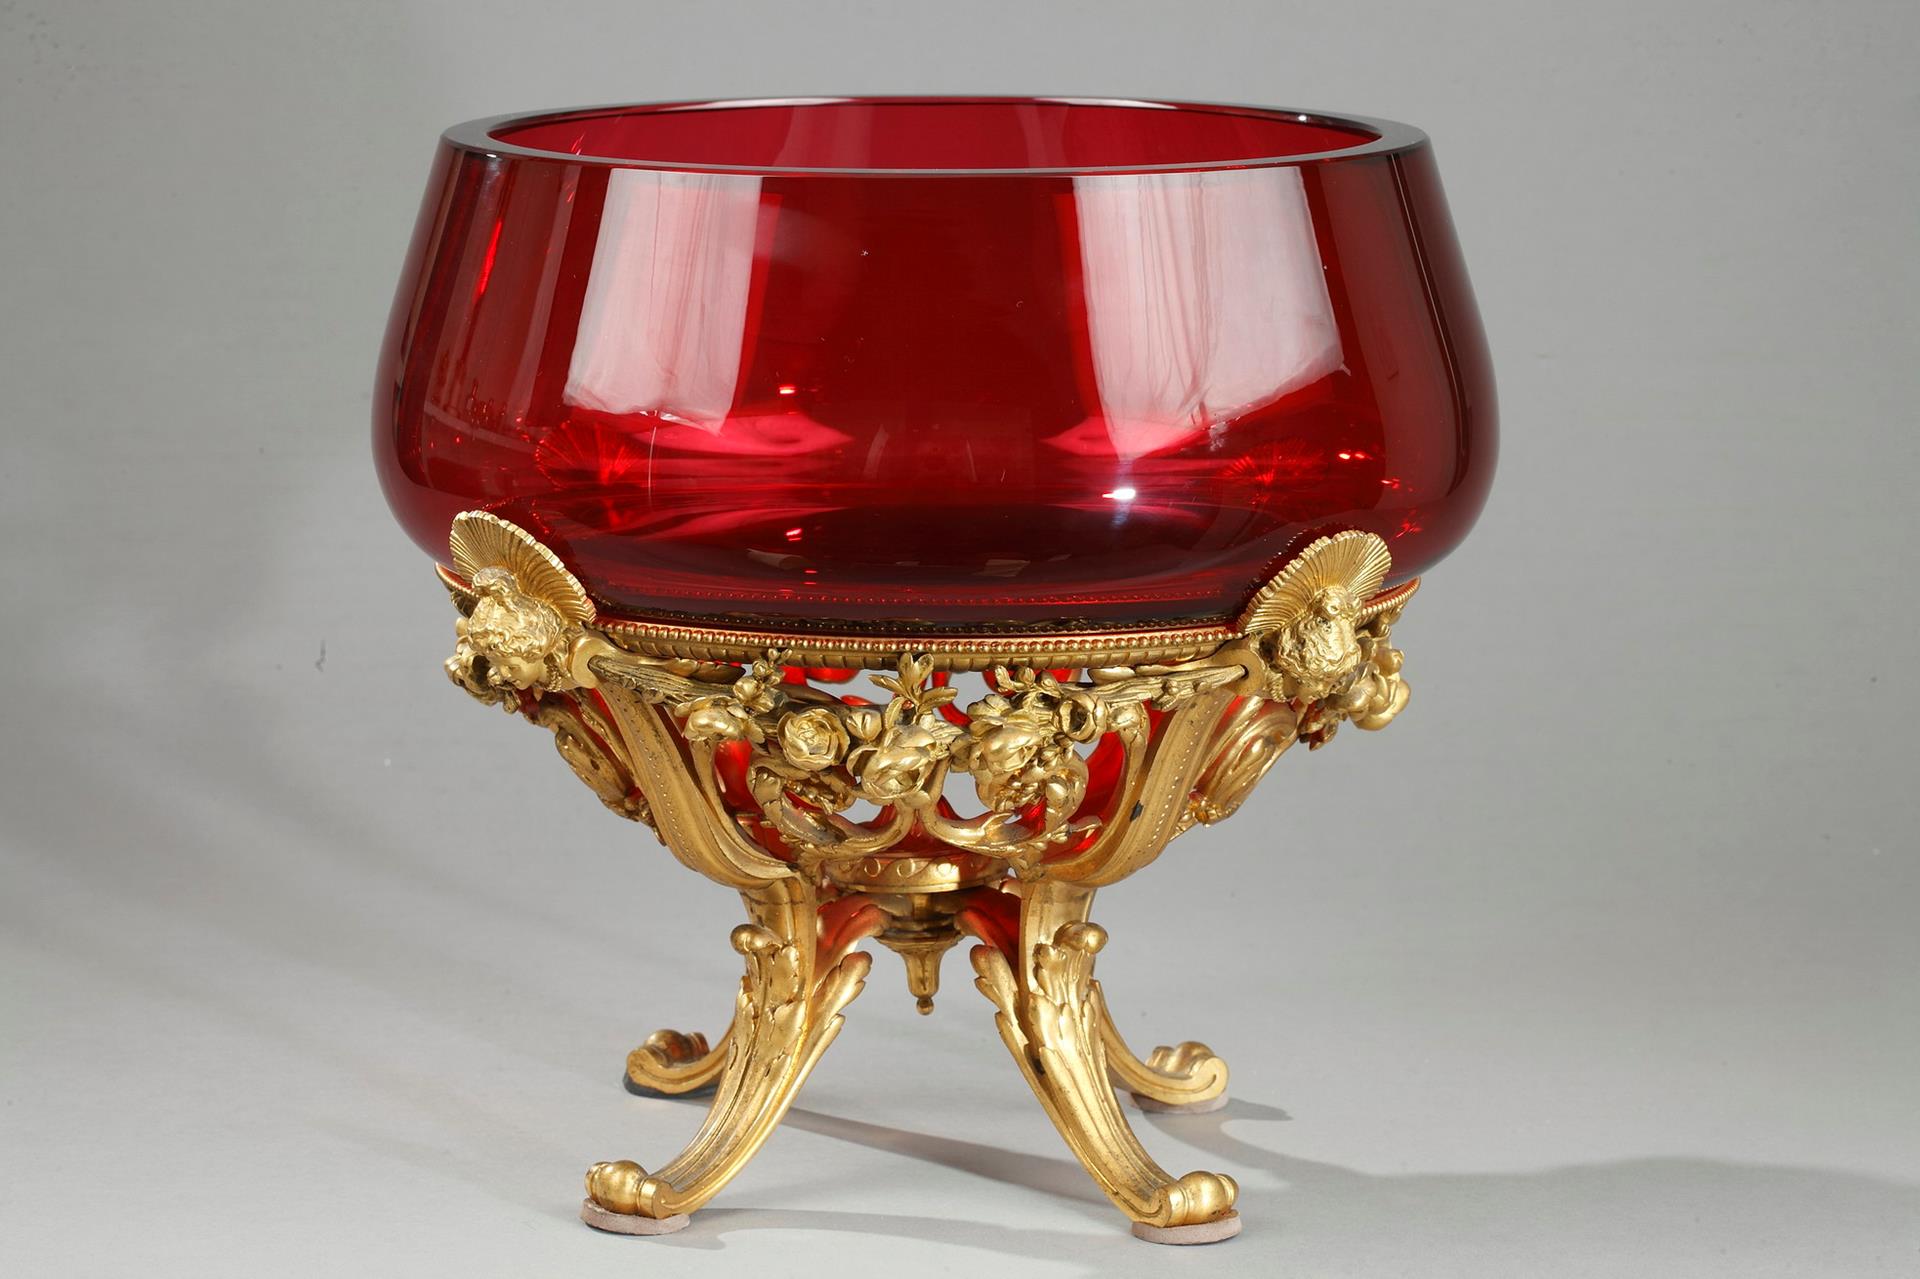 19th century large crystal and gilt bronze centerpiece. 